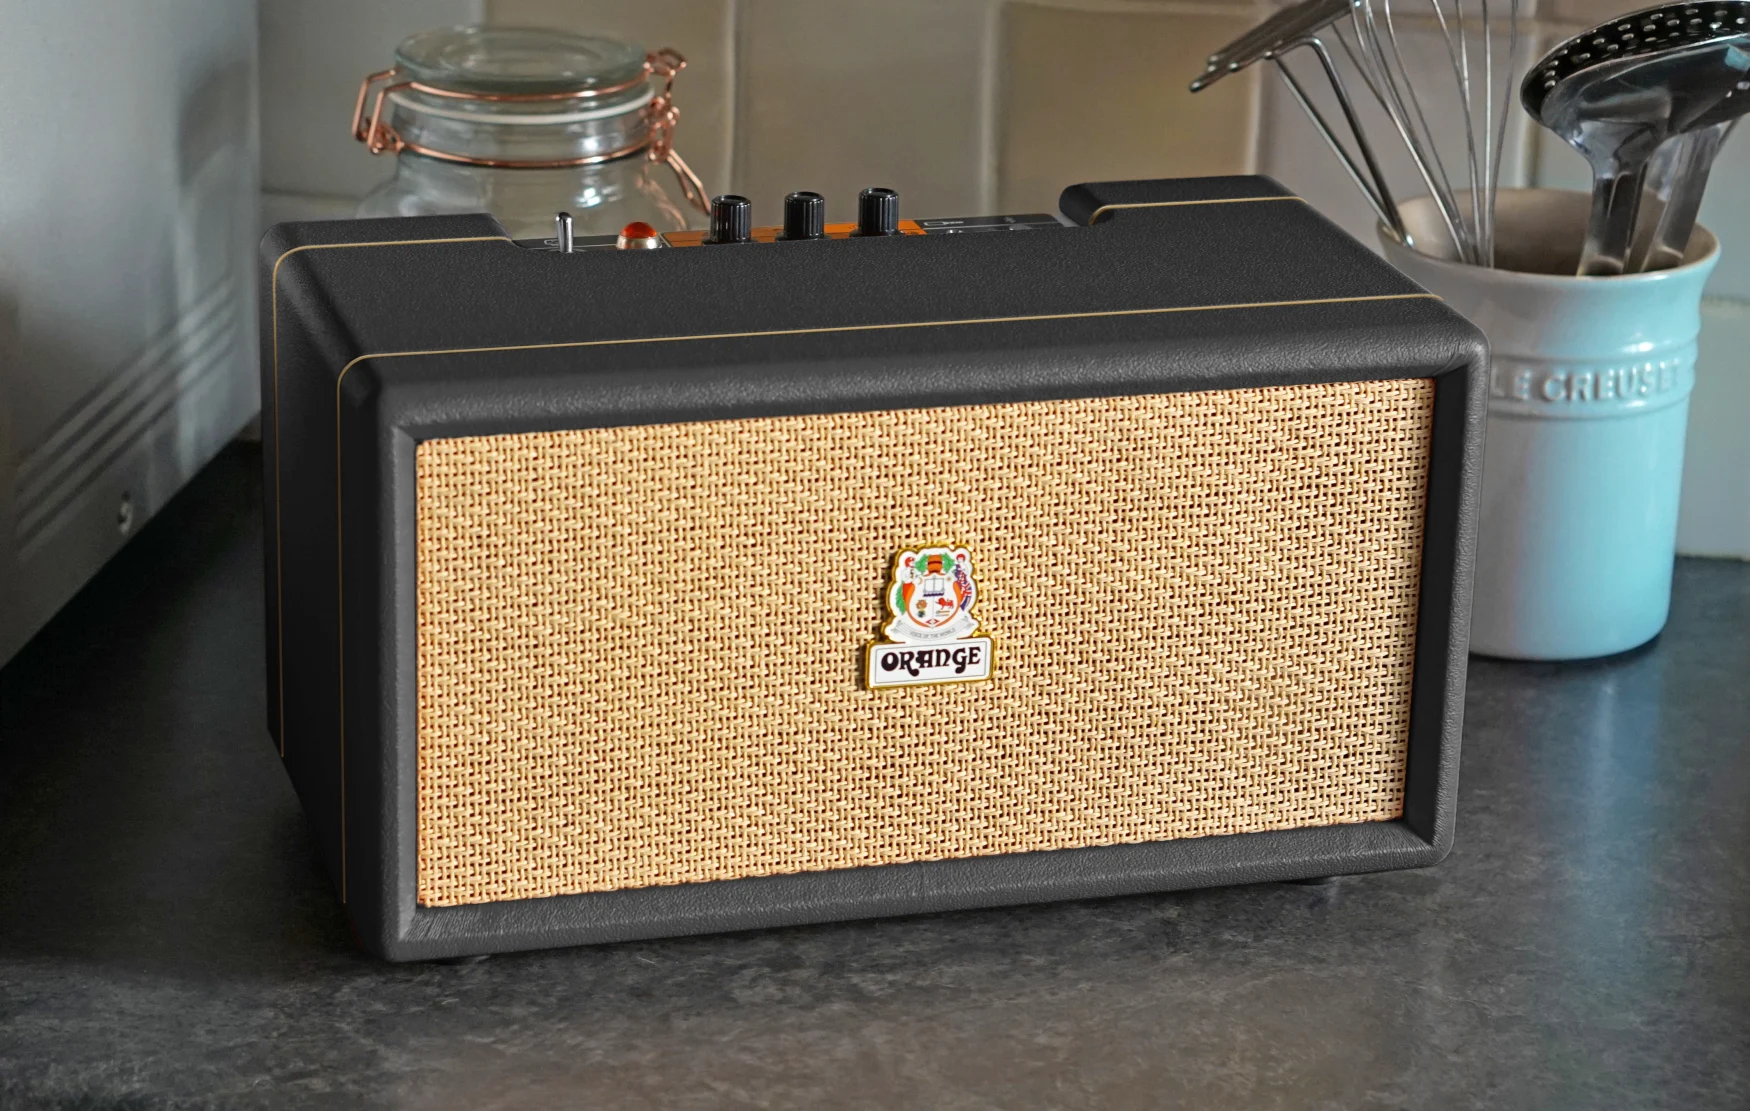 An Orange Amps Box-L wired Bluetooth speaker with a black exterior sits on a granite kitchen countertop.